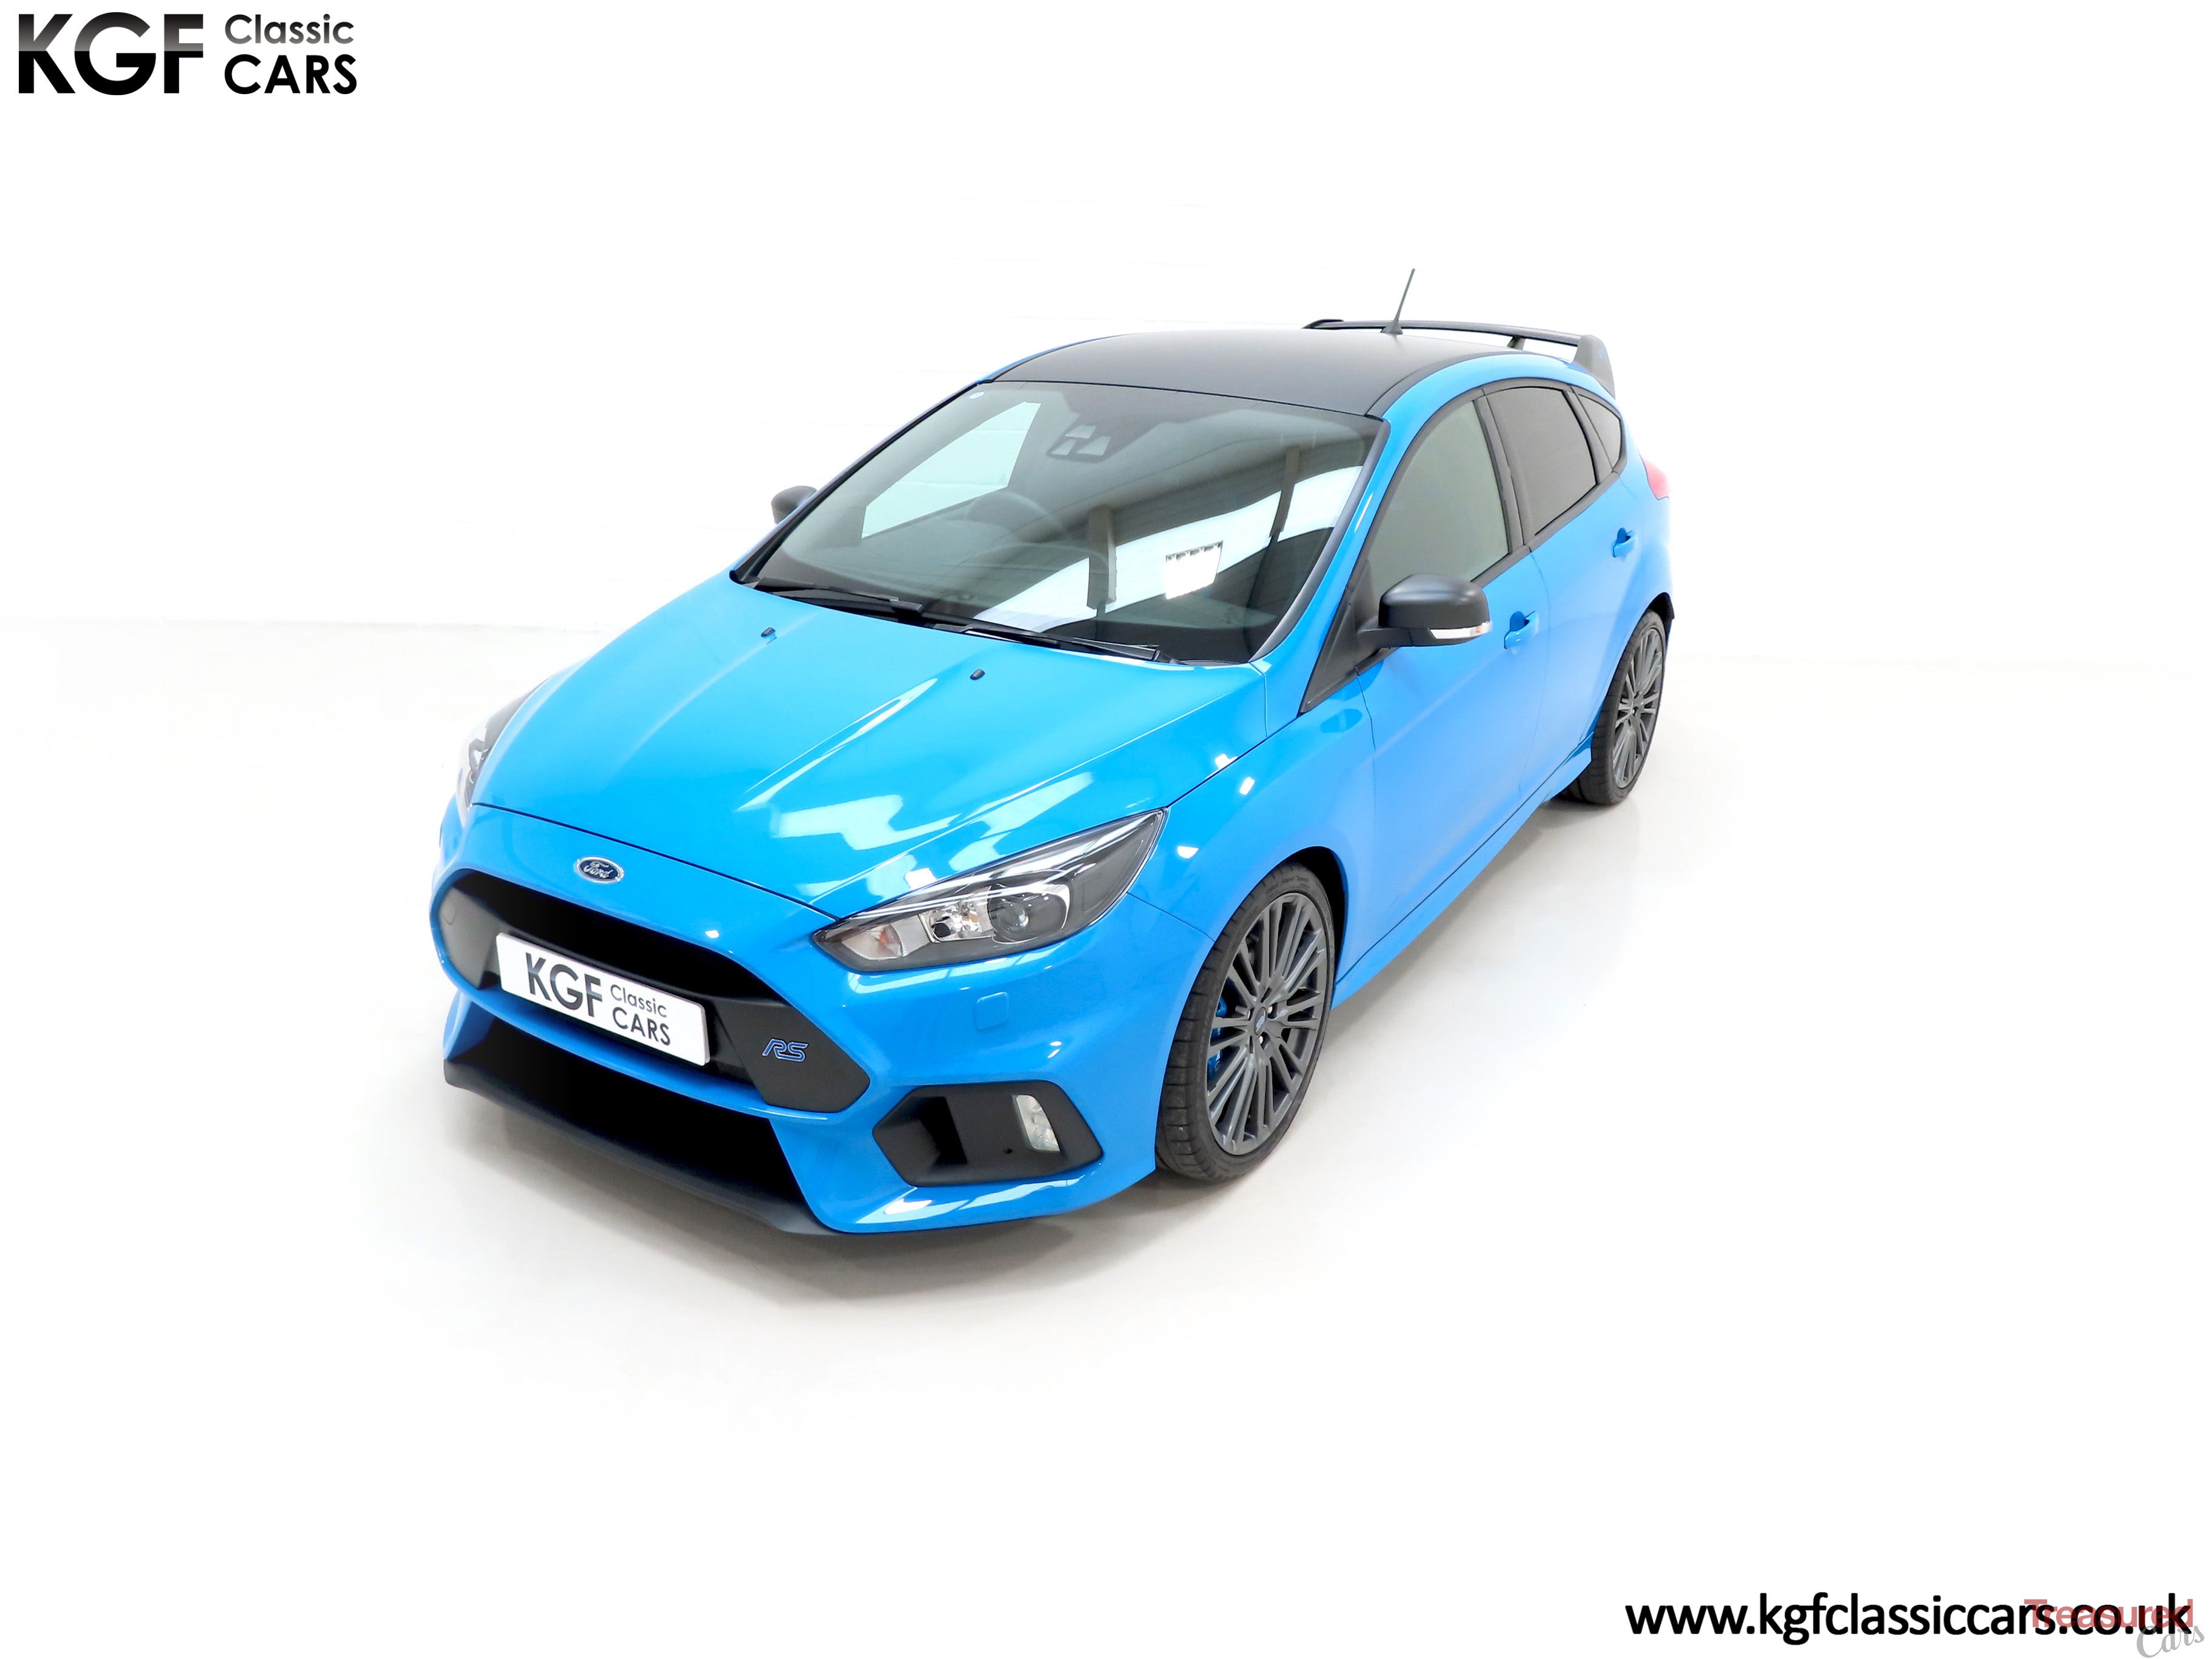 2018 Ford Focus RS Classic Cars for sale - Treasured Cars